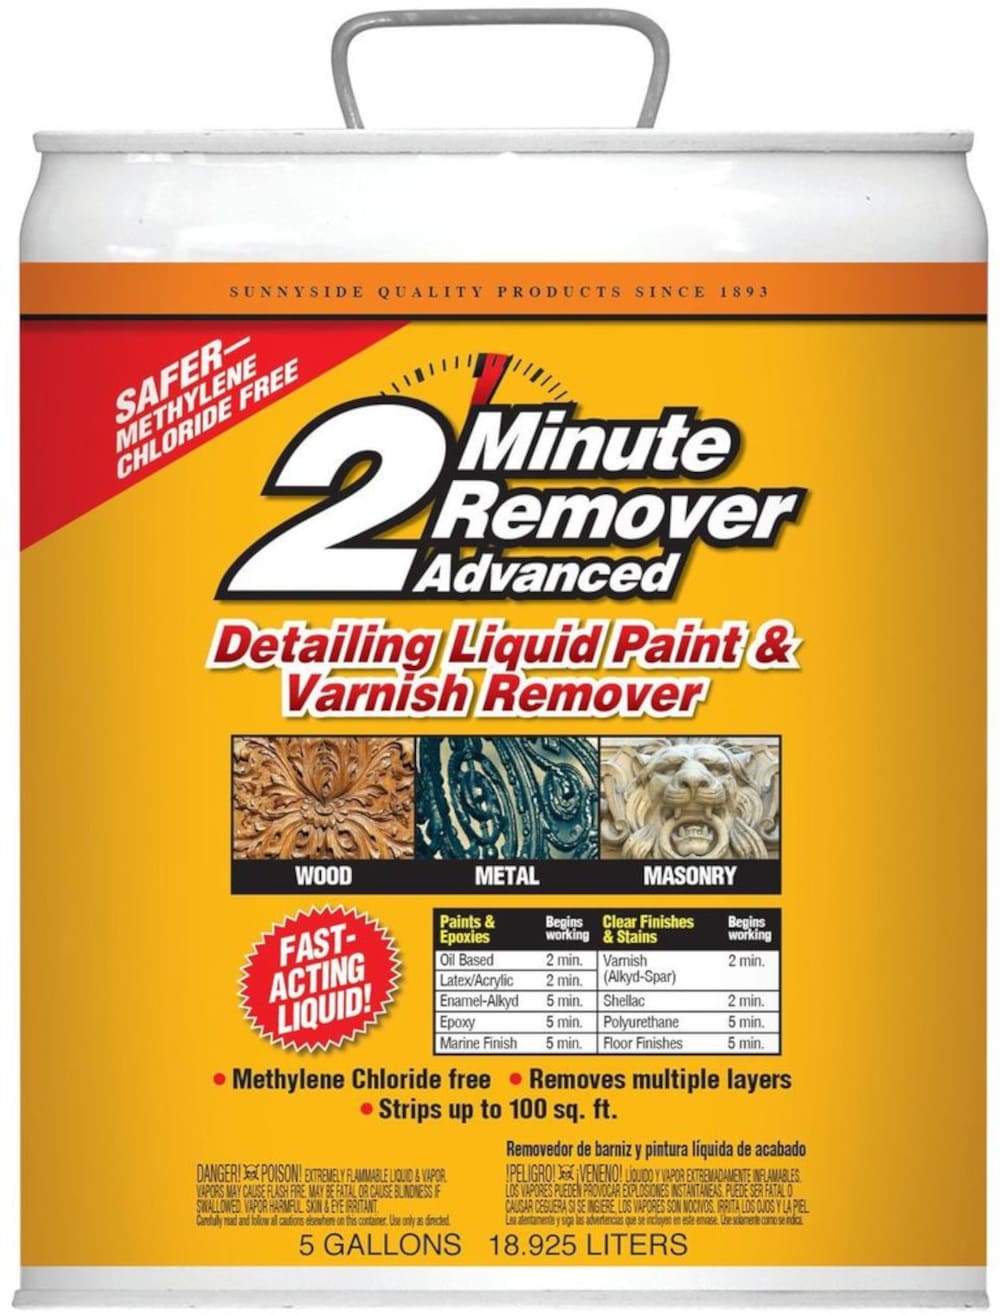 DELUXE MATERIALS AC22 Strip Magic Paint Remover for Plastic Models